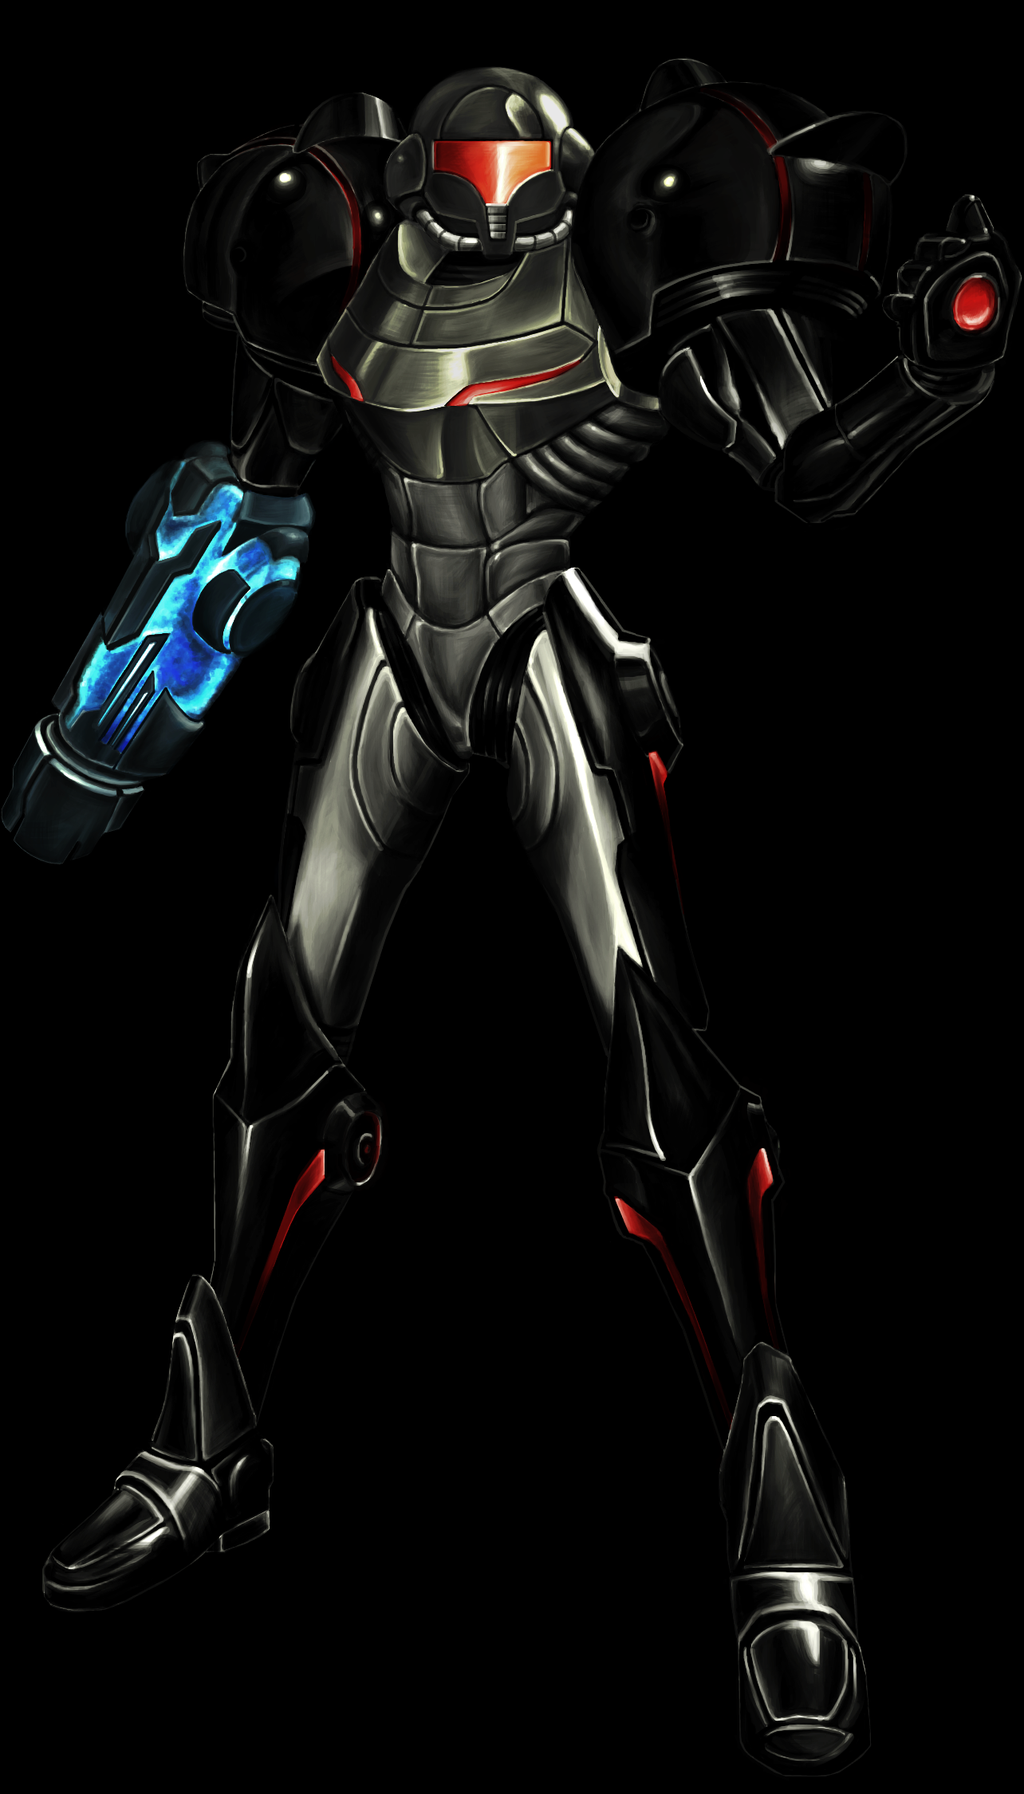 phazon_suit_samus_by_boxedwater-d3dnhbw.png